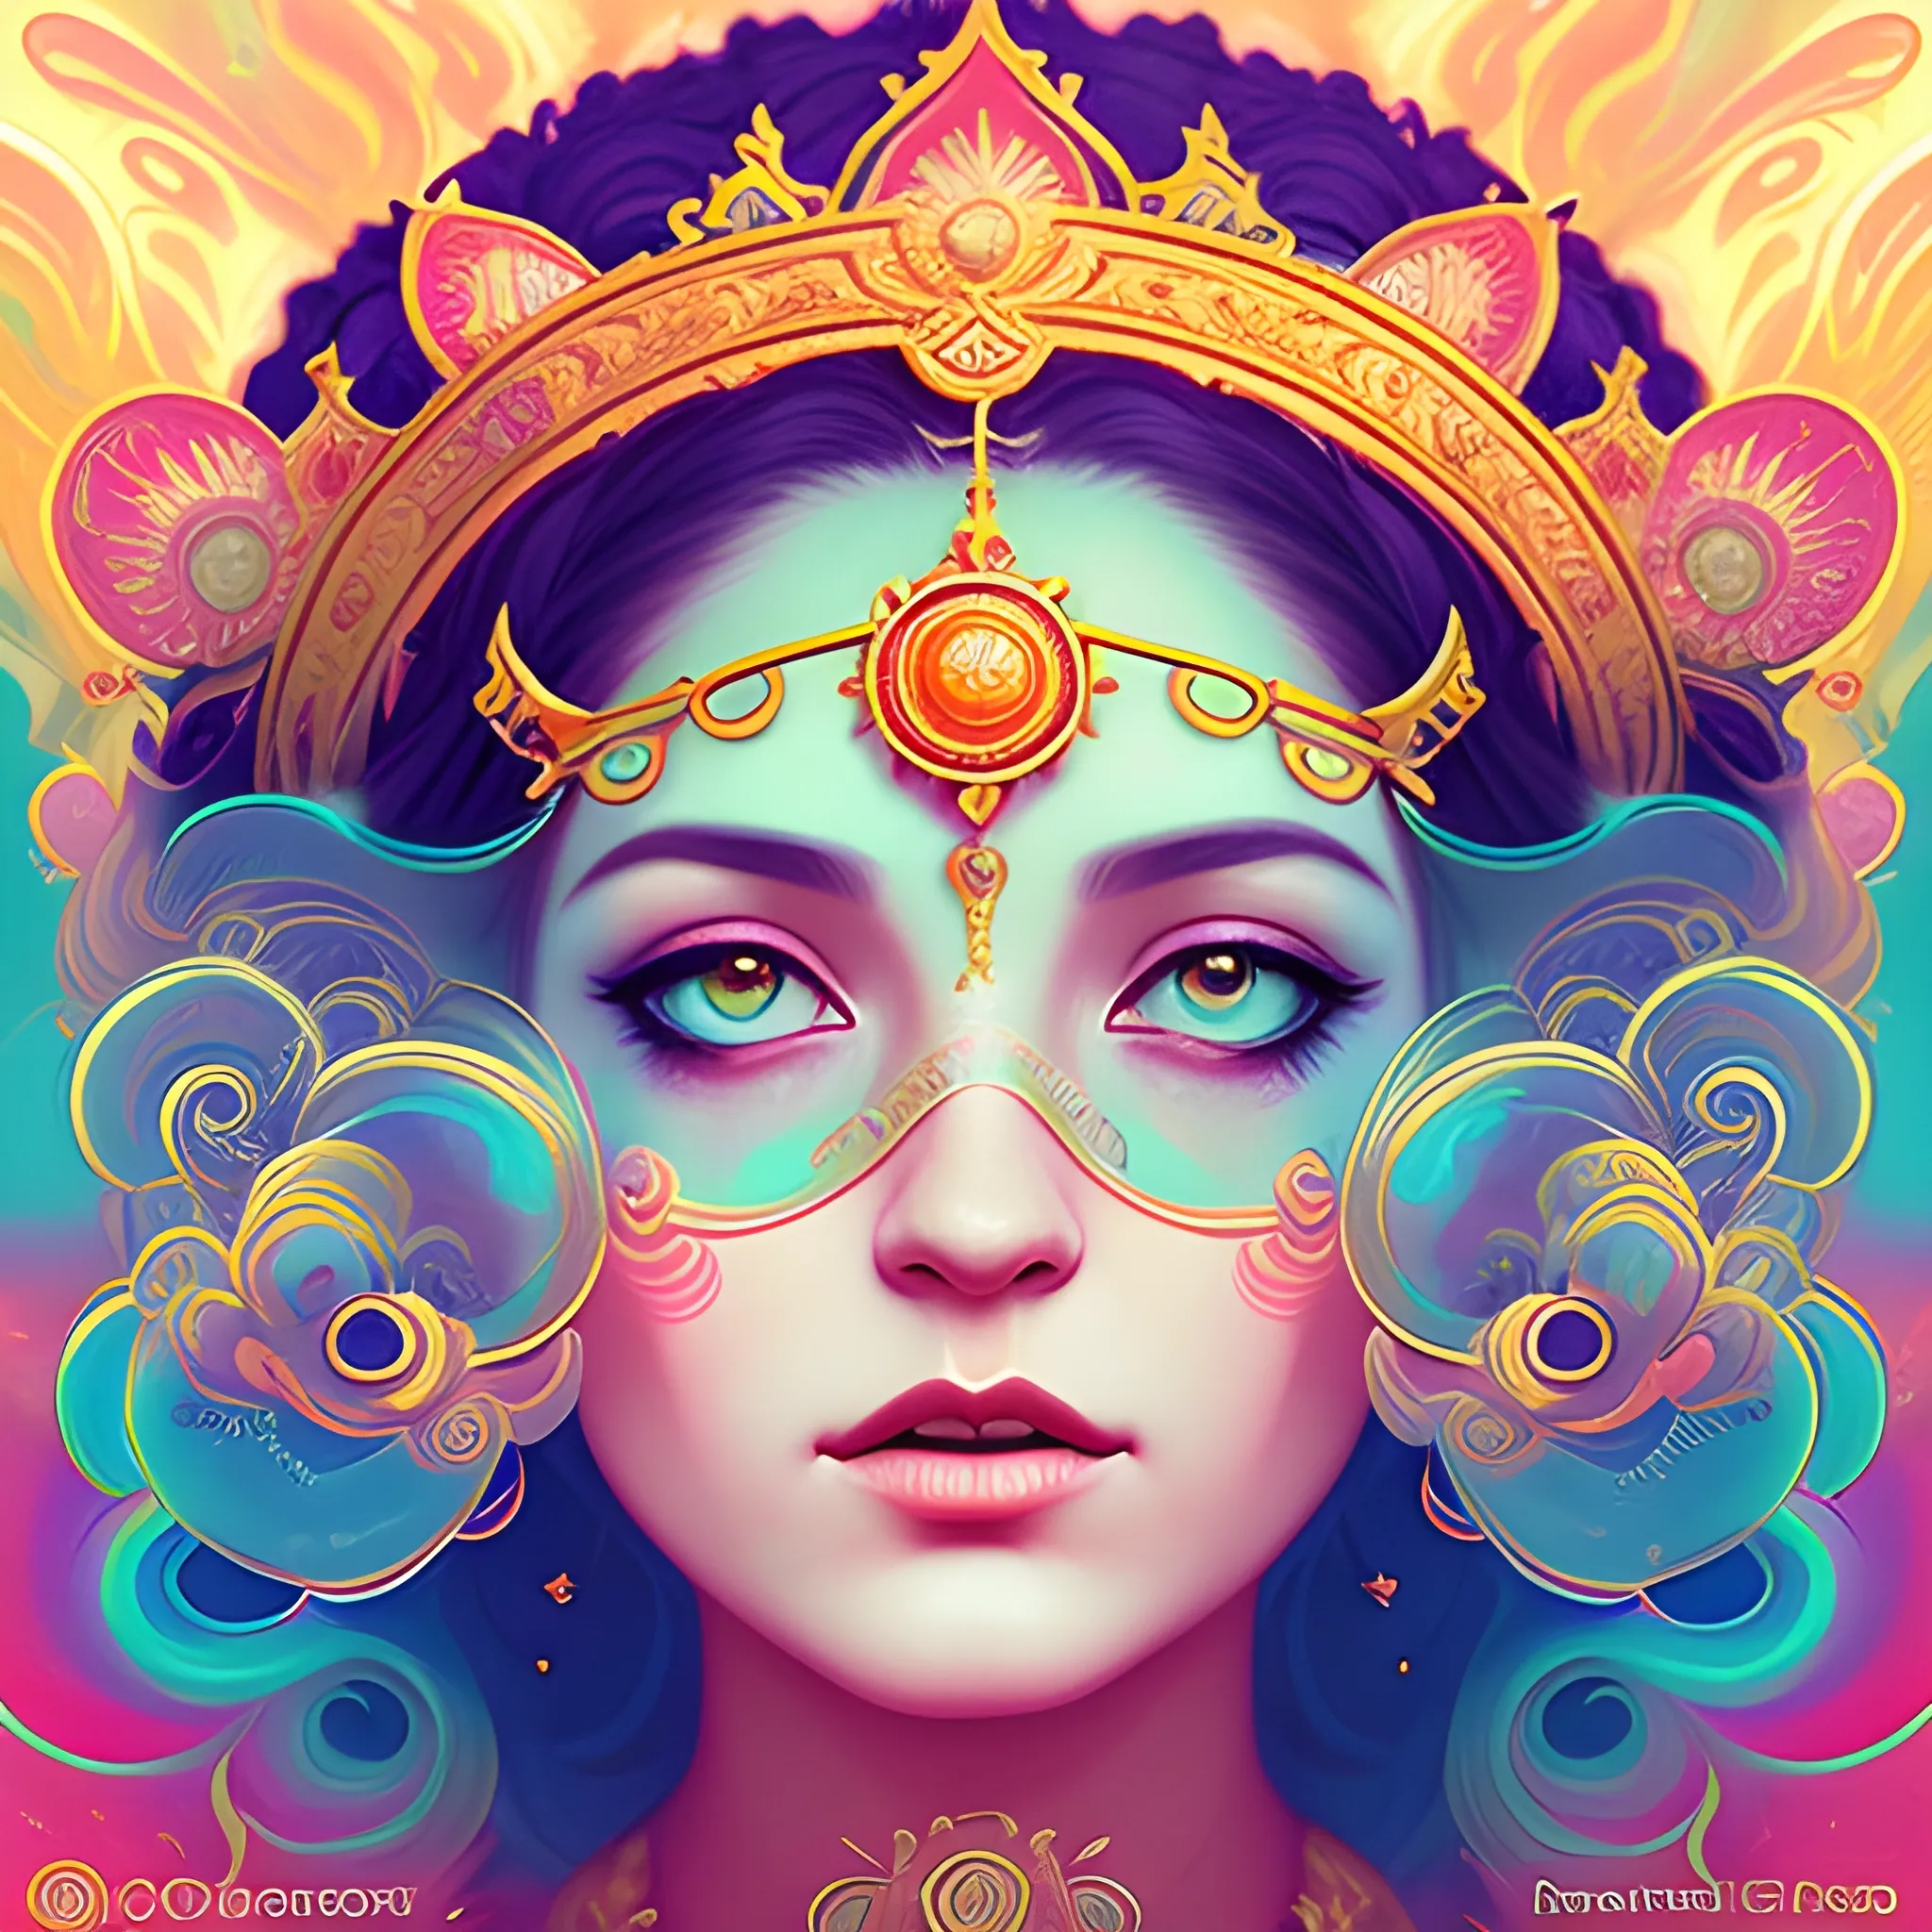 Flowery beautiful face divine feminine intimate expression empress or priestess with gold jewellery, by petros afshar, ross tran, Tom Bagshaw, tom whalen, underwater bubbly psychedelic clouds, Anaglyph 3D lens blur effect